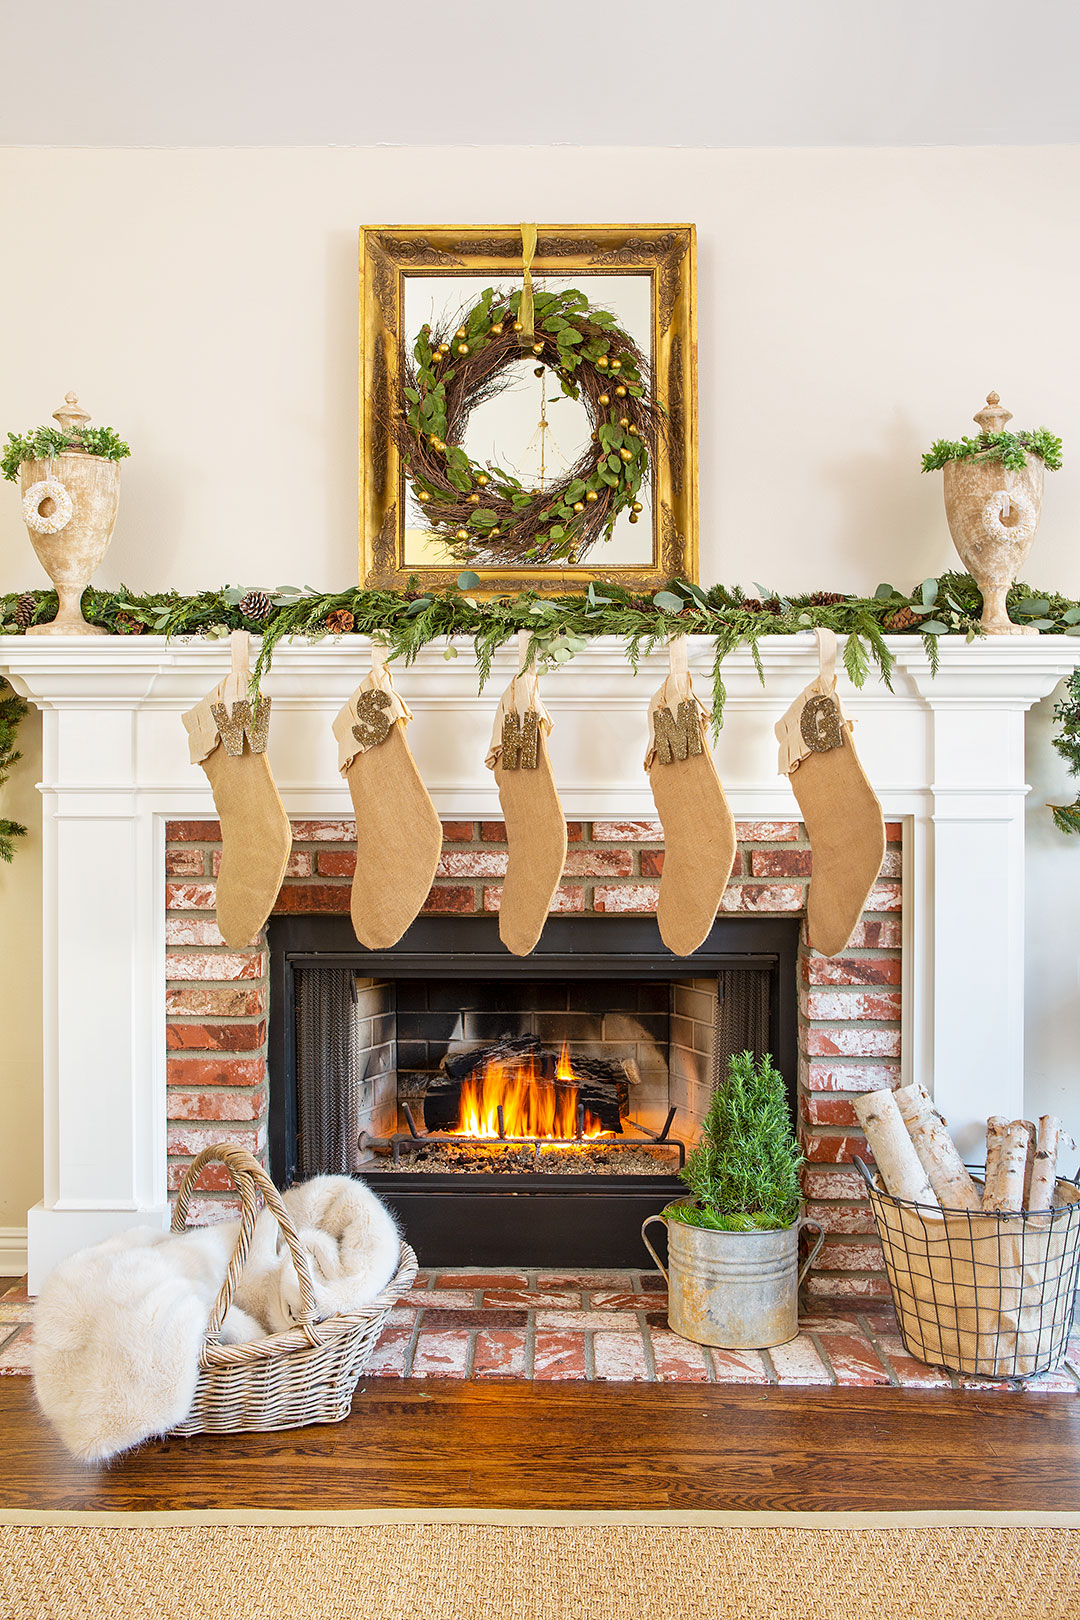 A living room mantel and fireplace with neutral decor and natural greenery